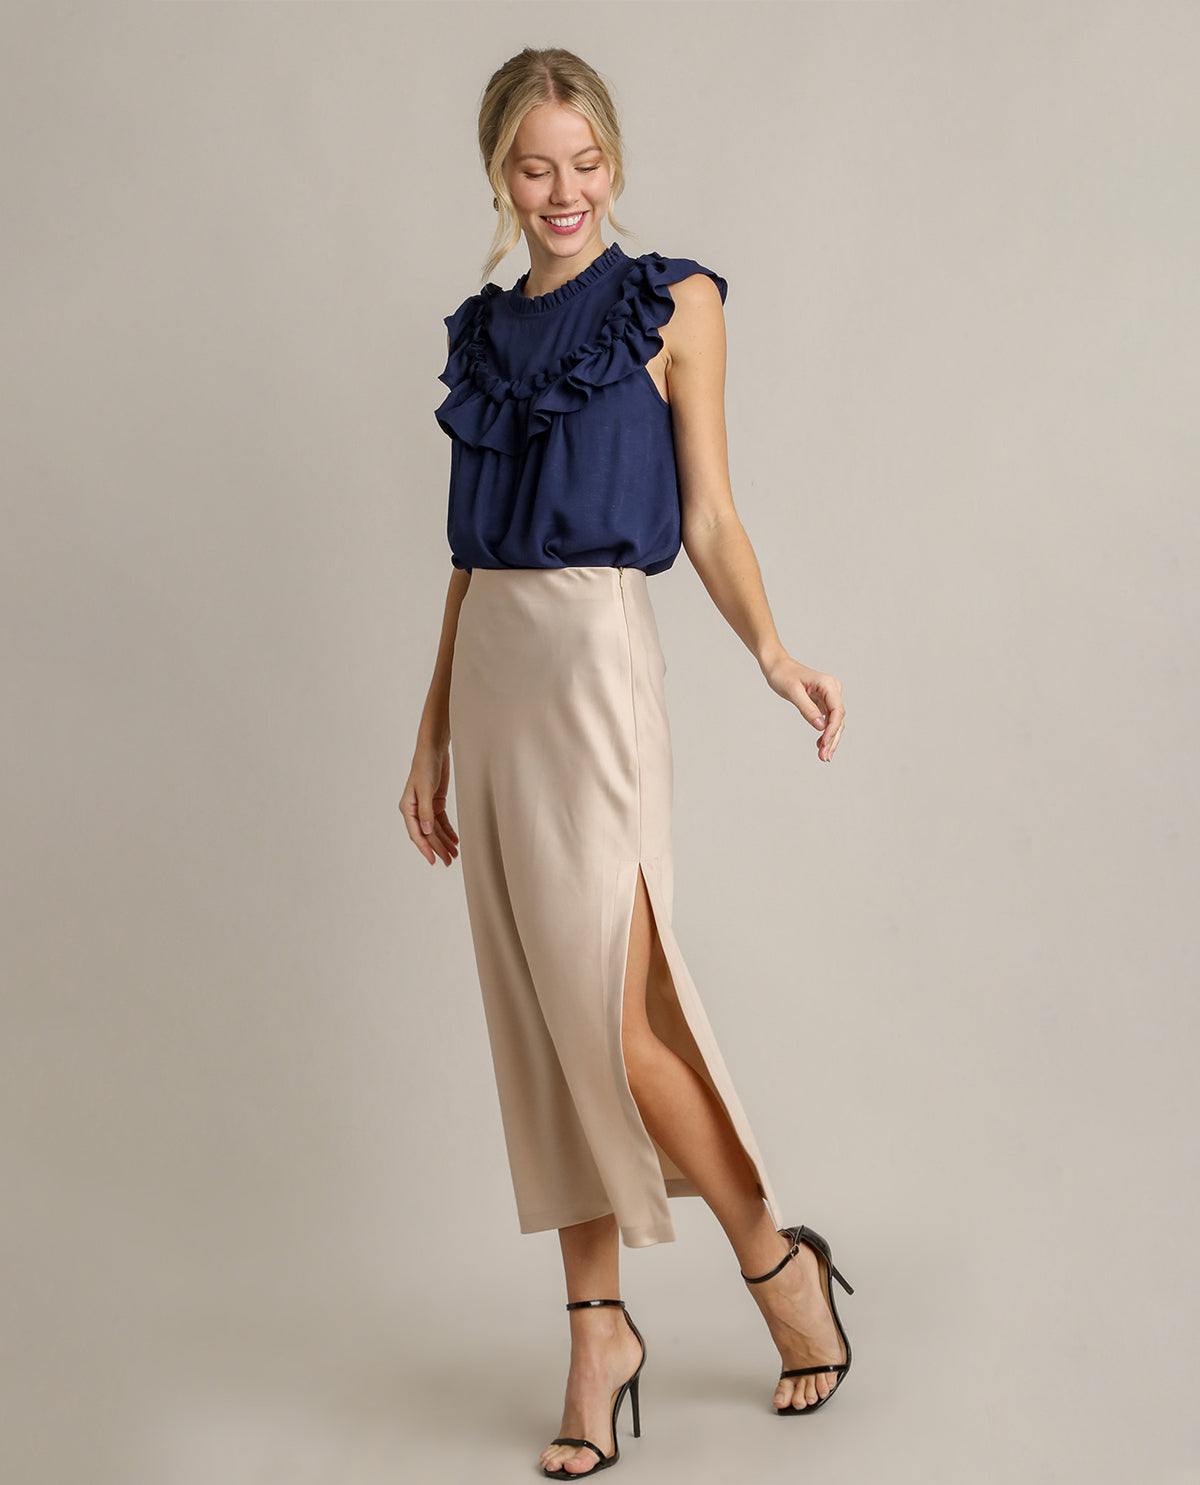 Ruffle Blouse with Flutter Sleeves